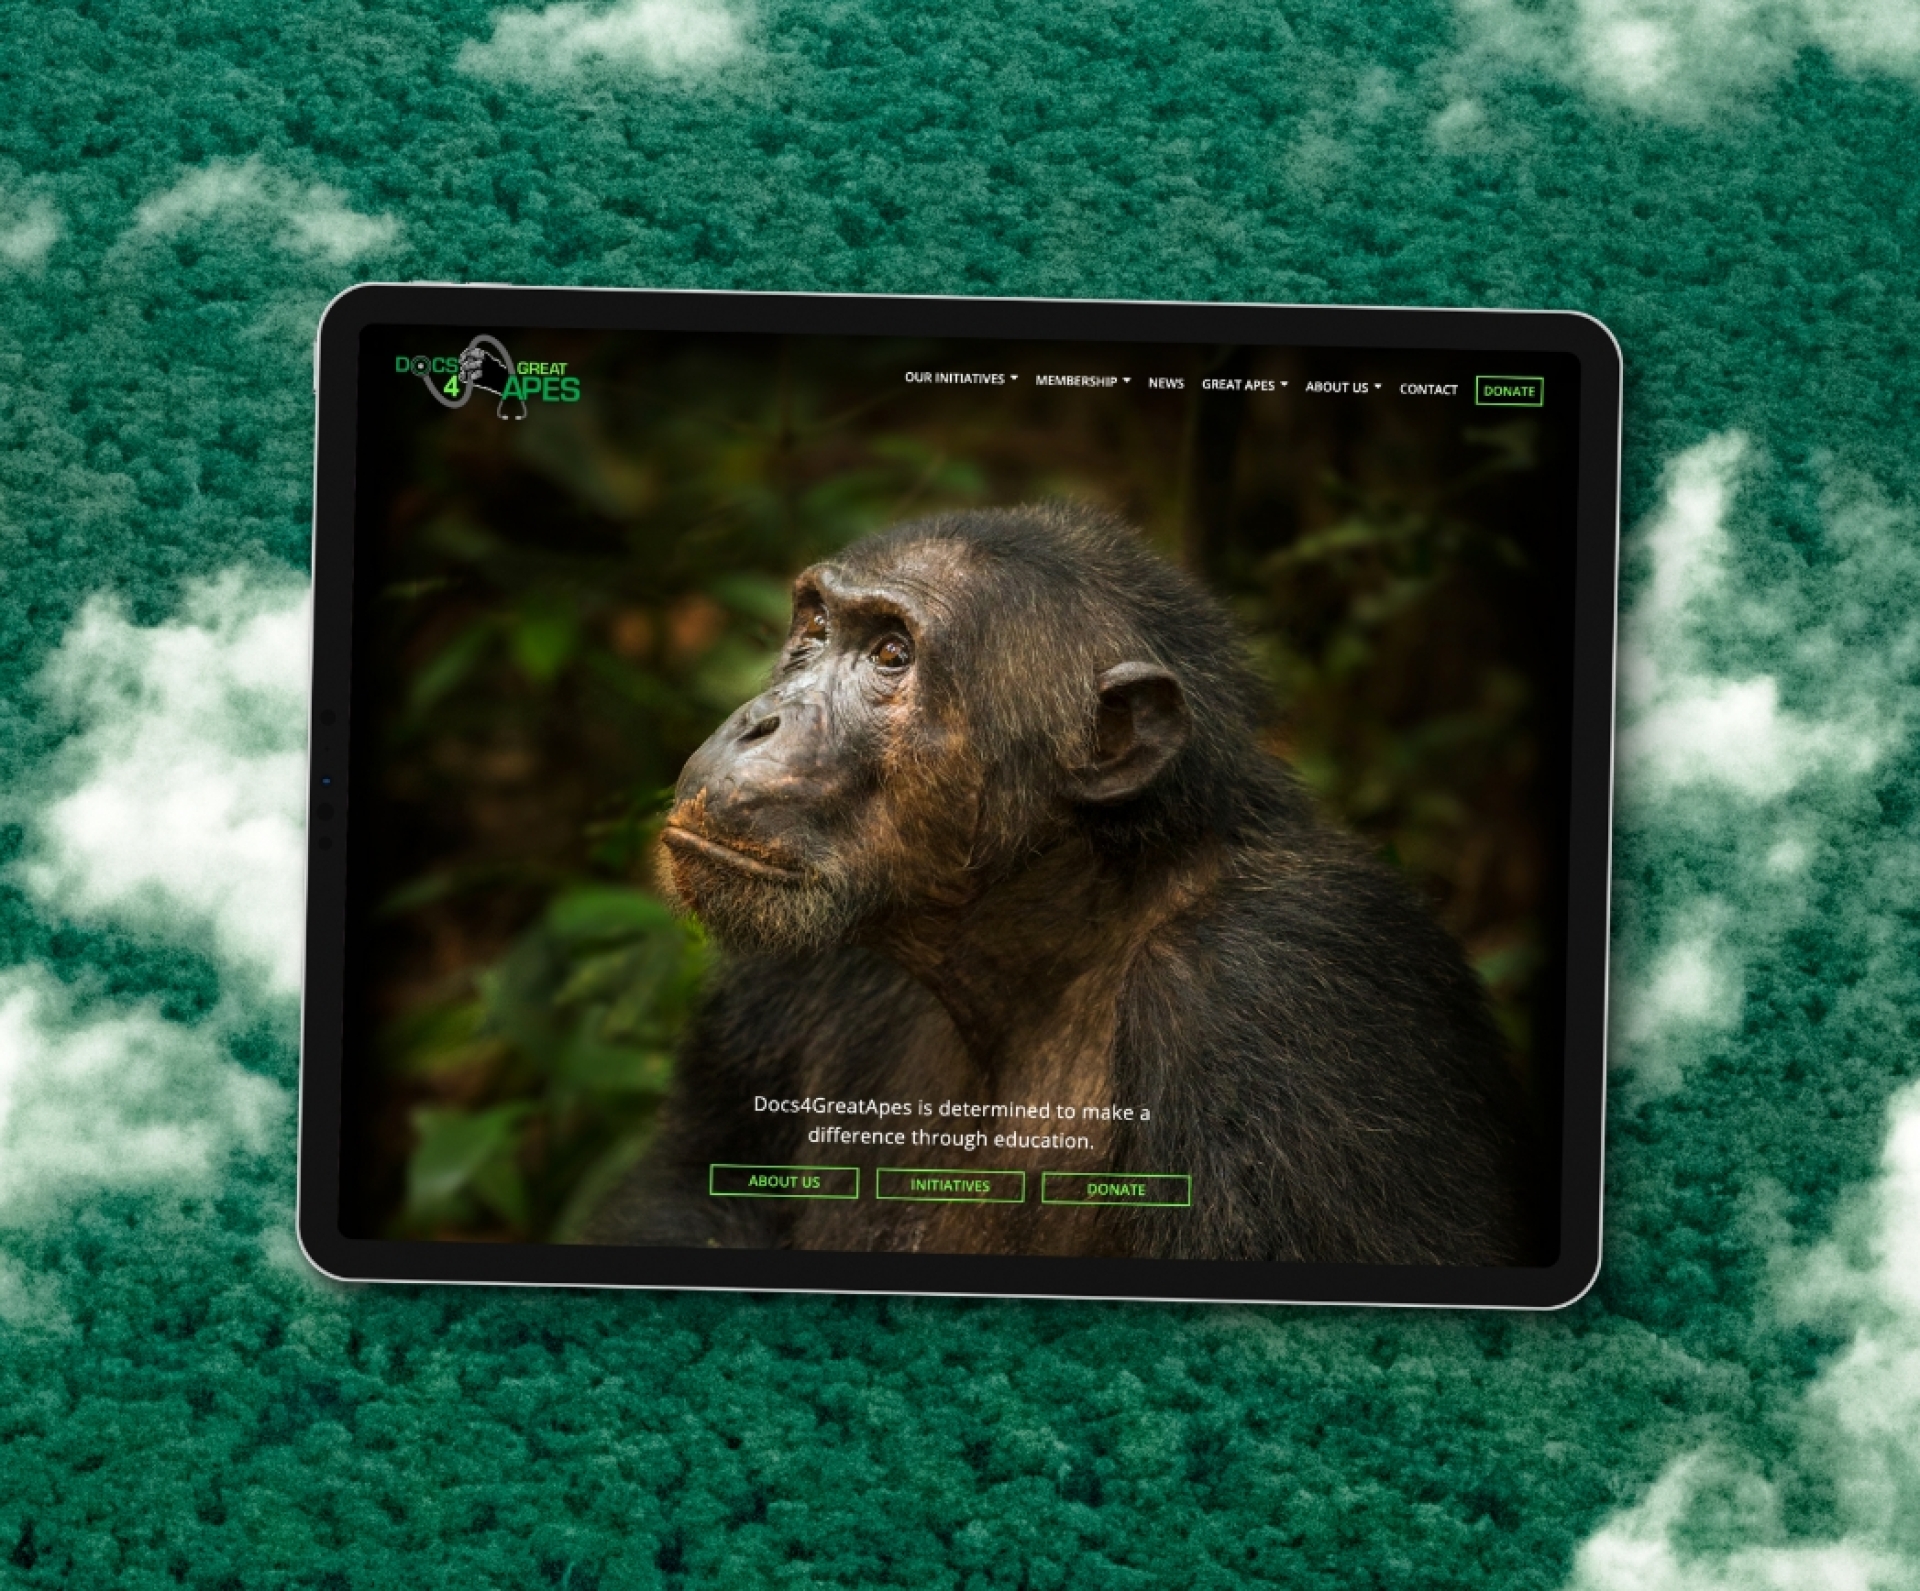 Docs4GreatApes website design showcased on a tablet screen with a jungle in the background